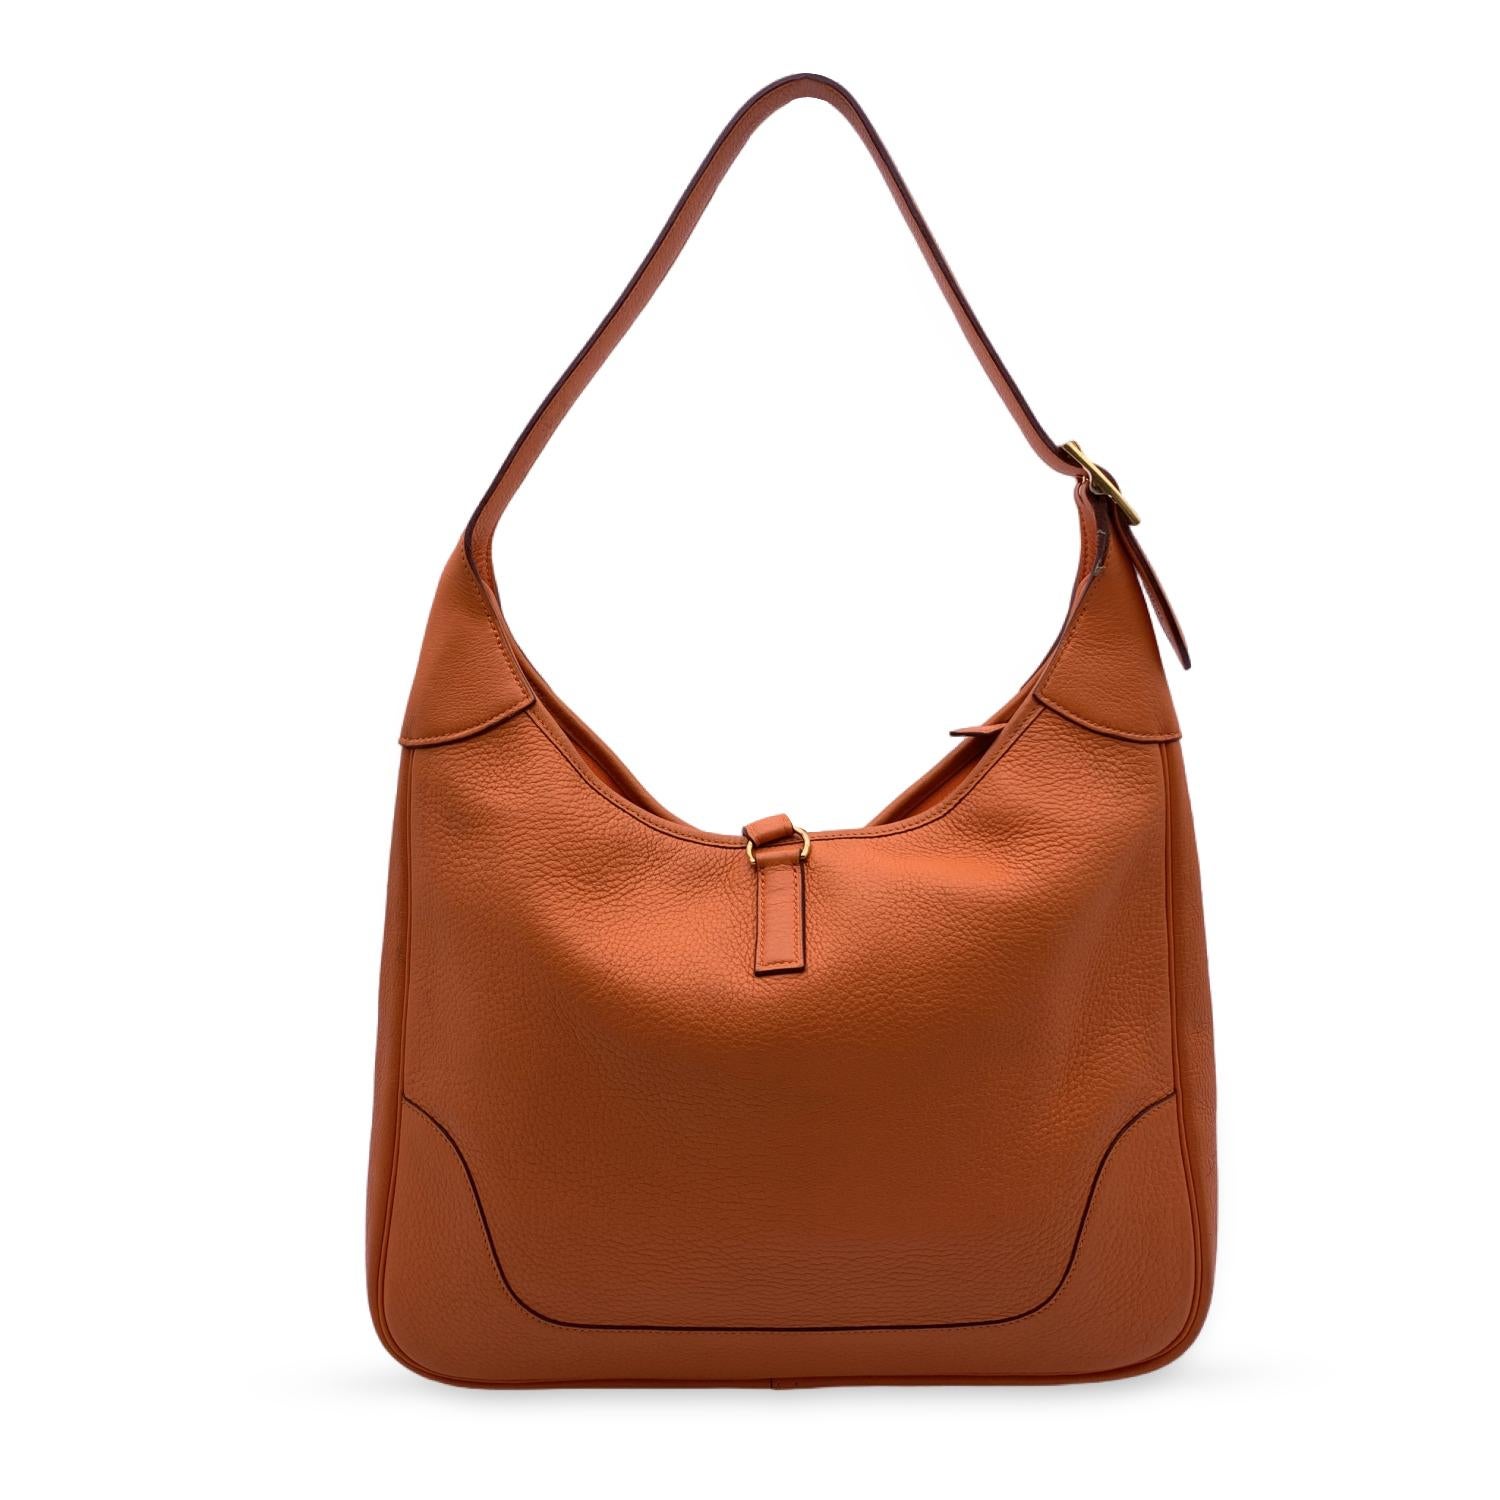 Hermes Orange Leather Sac Trim II 35 Hobo Shoulder Bag In Excellent Condition In Rome, Rome